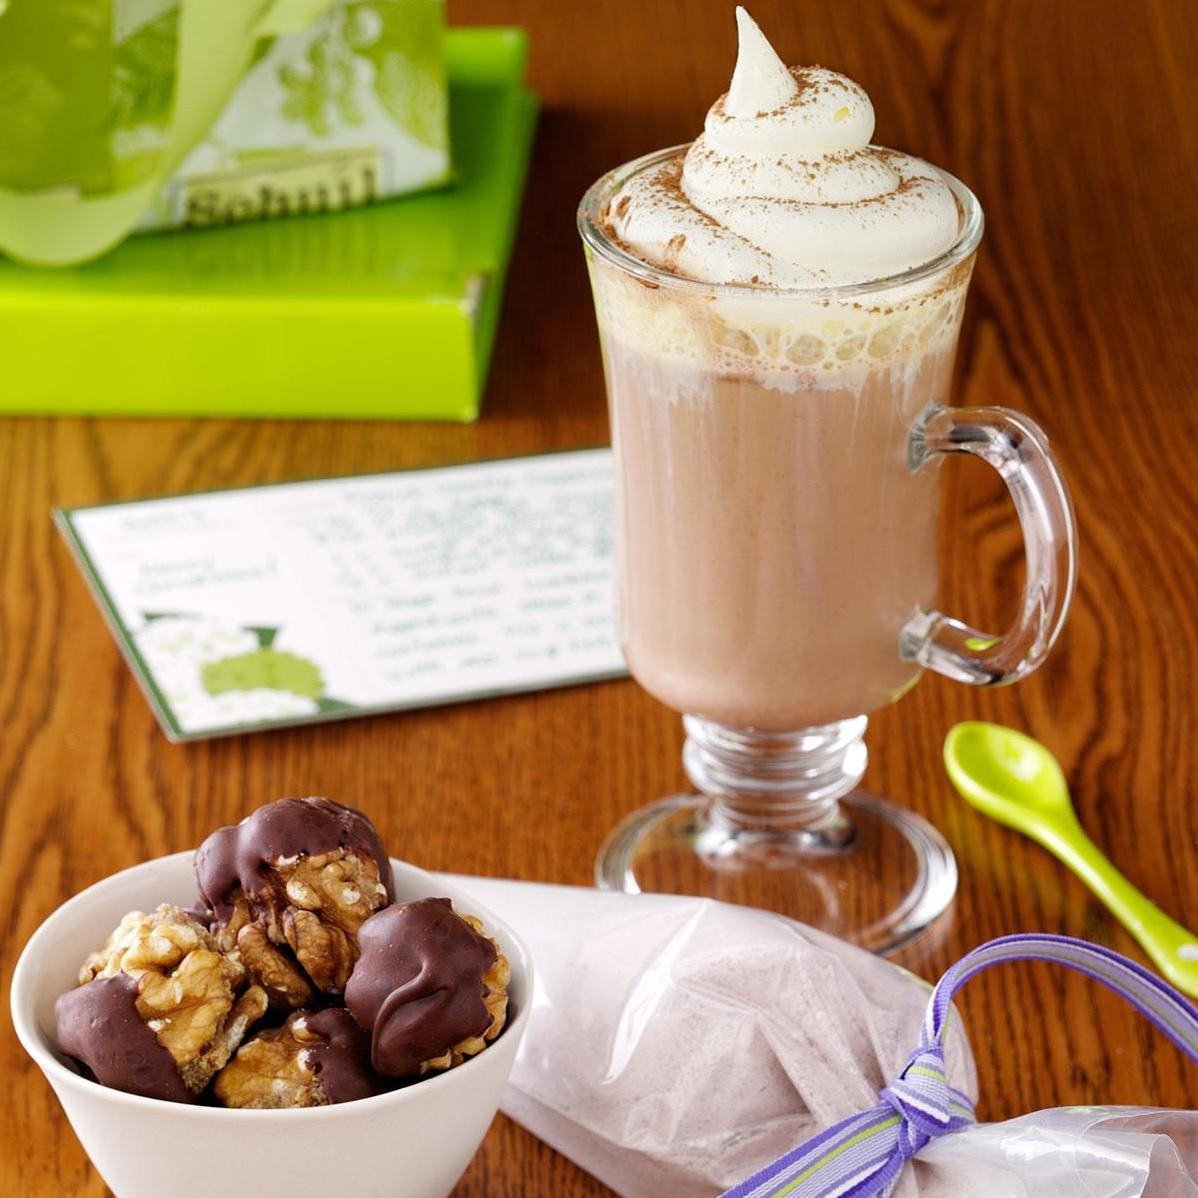  Satisfy your sweet tooth and caffeine fix all in one sip.